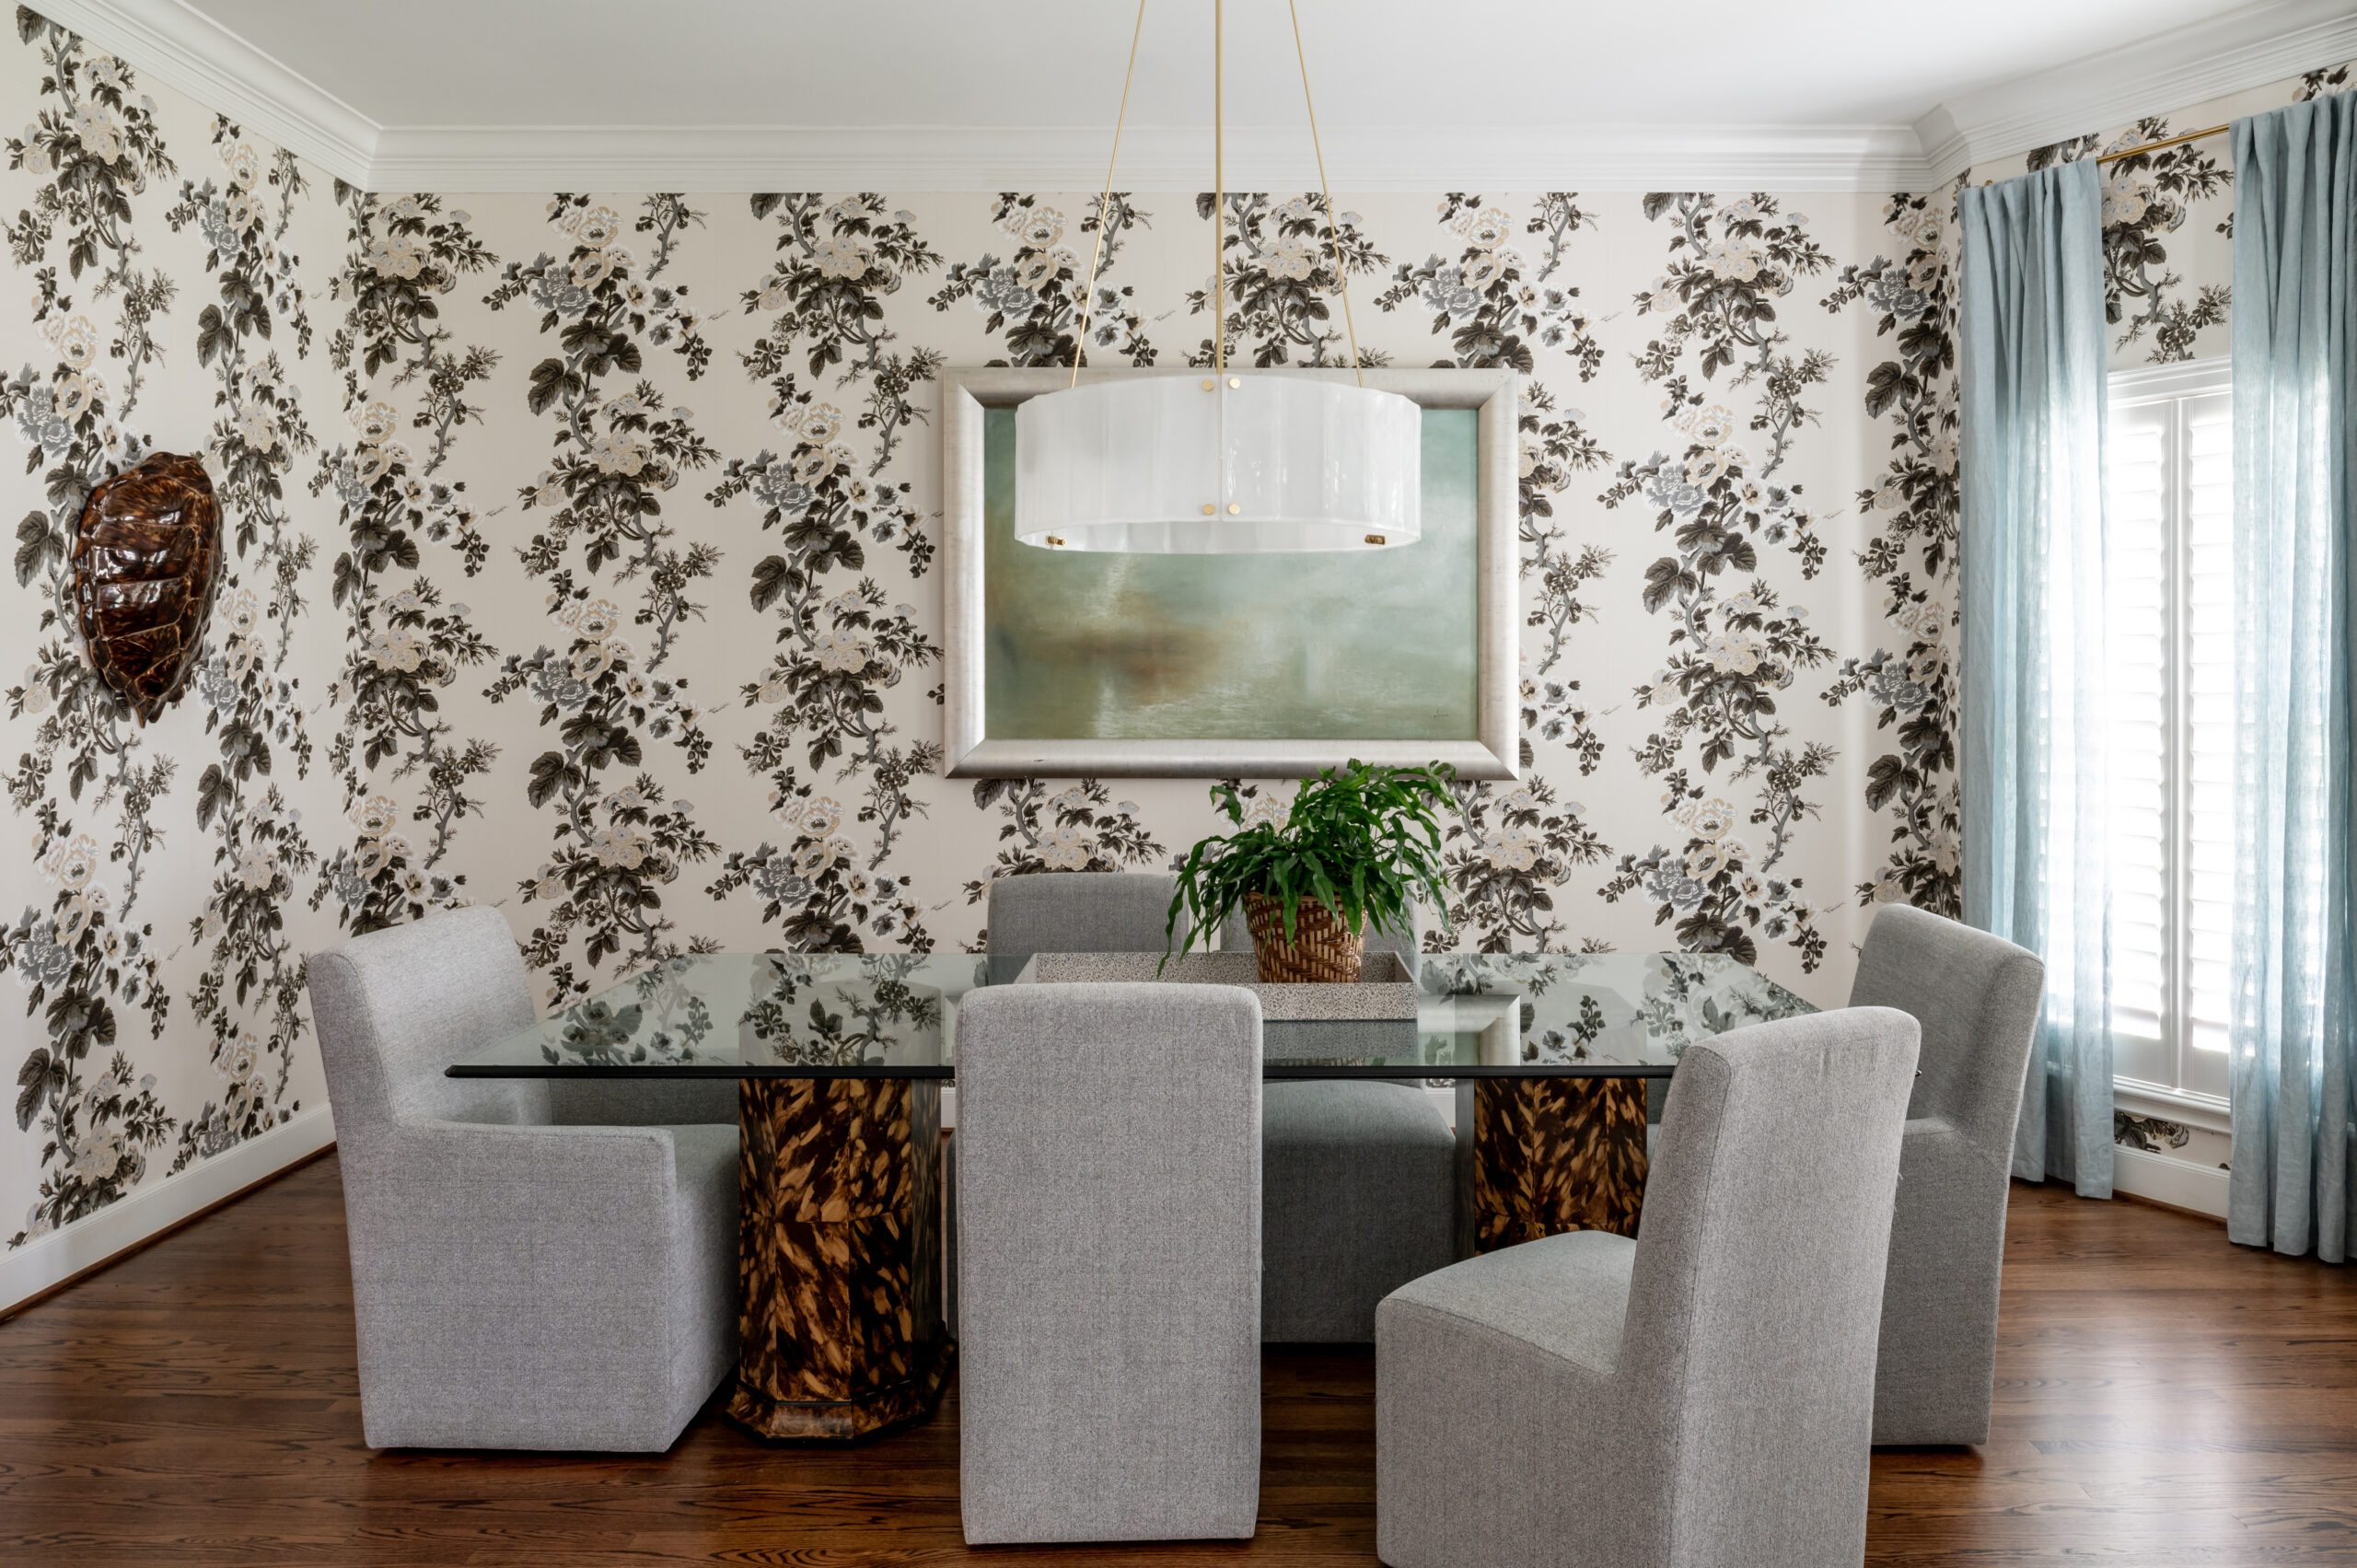 Dining room interior design photo of dream wallpaper, paired with custom-painted table bases in a tortoiseshell pattern